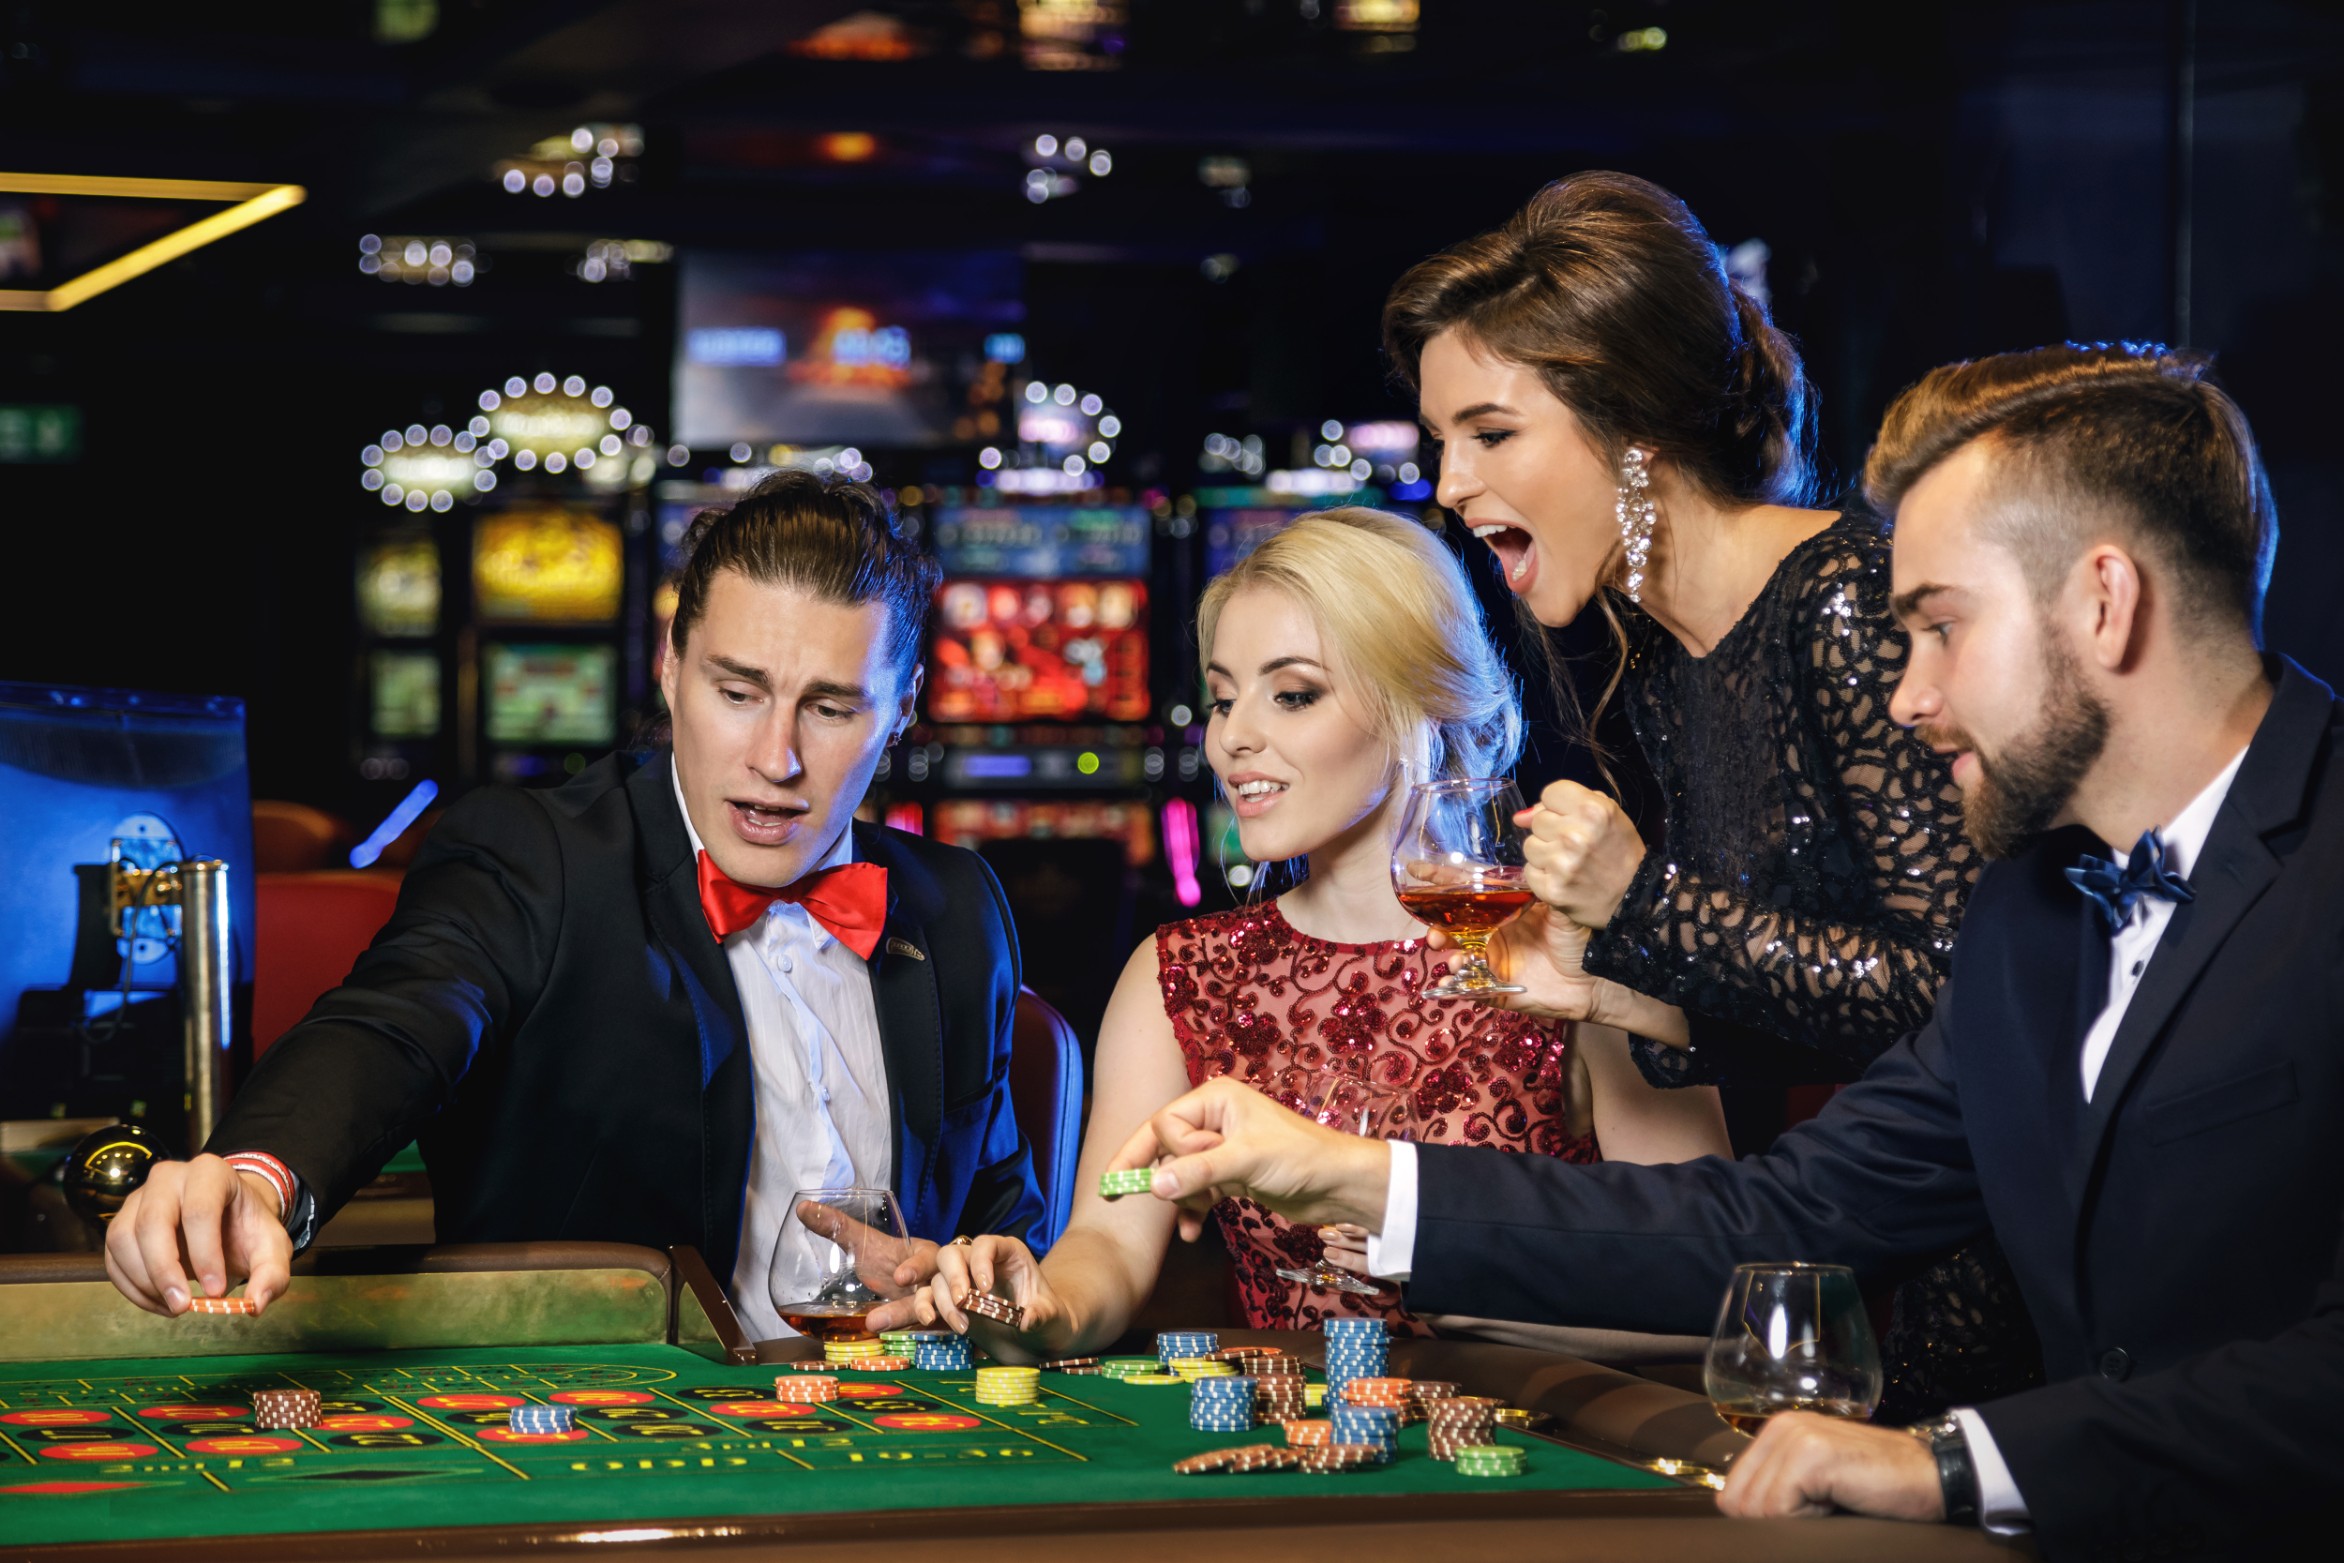 People Playing Blackjack in a casino